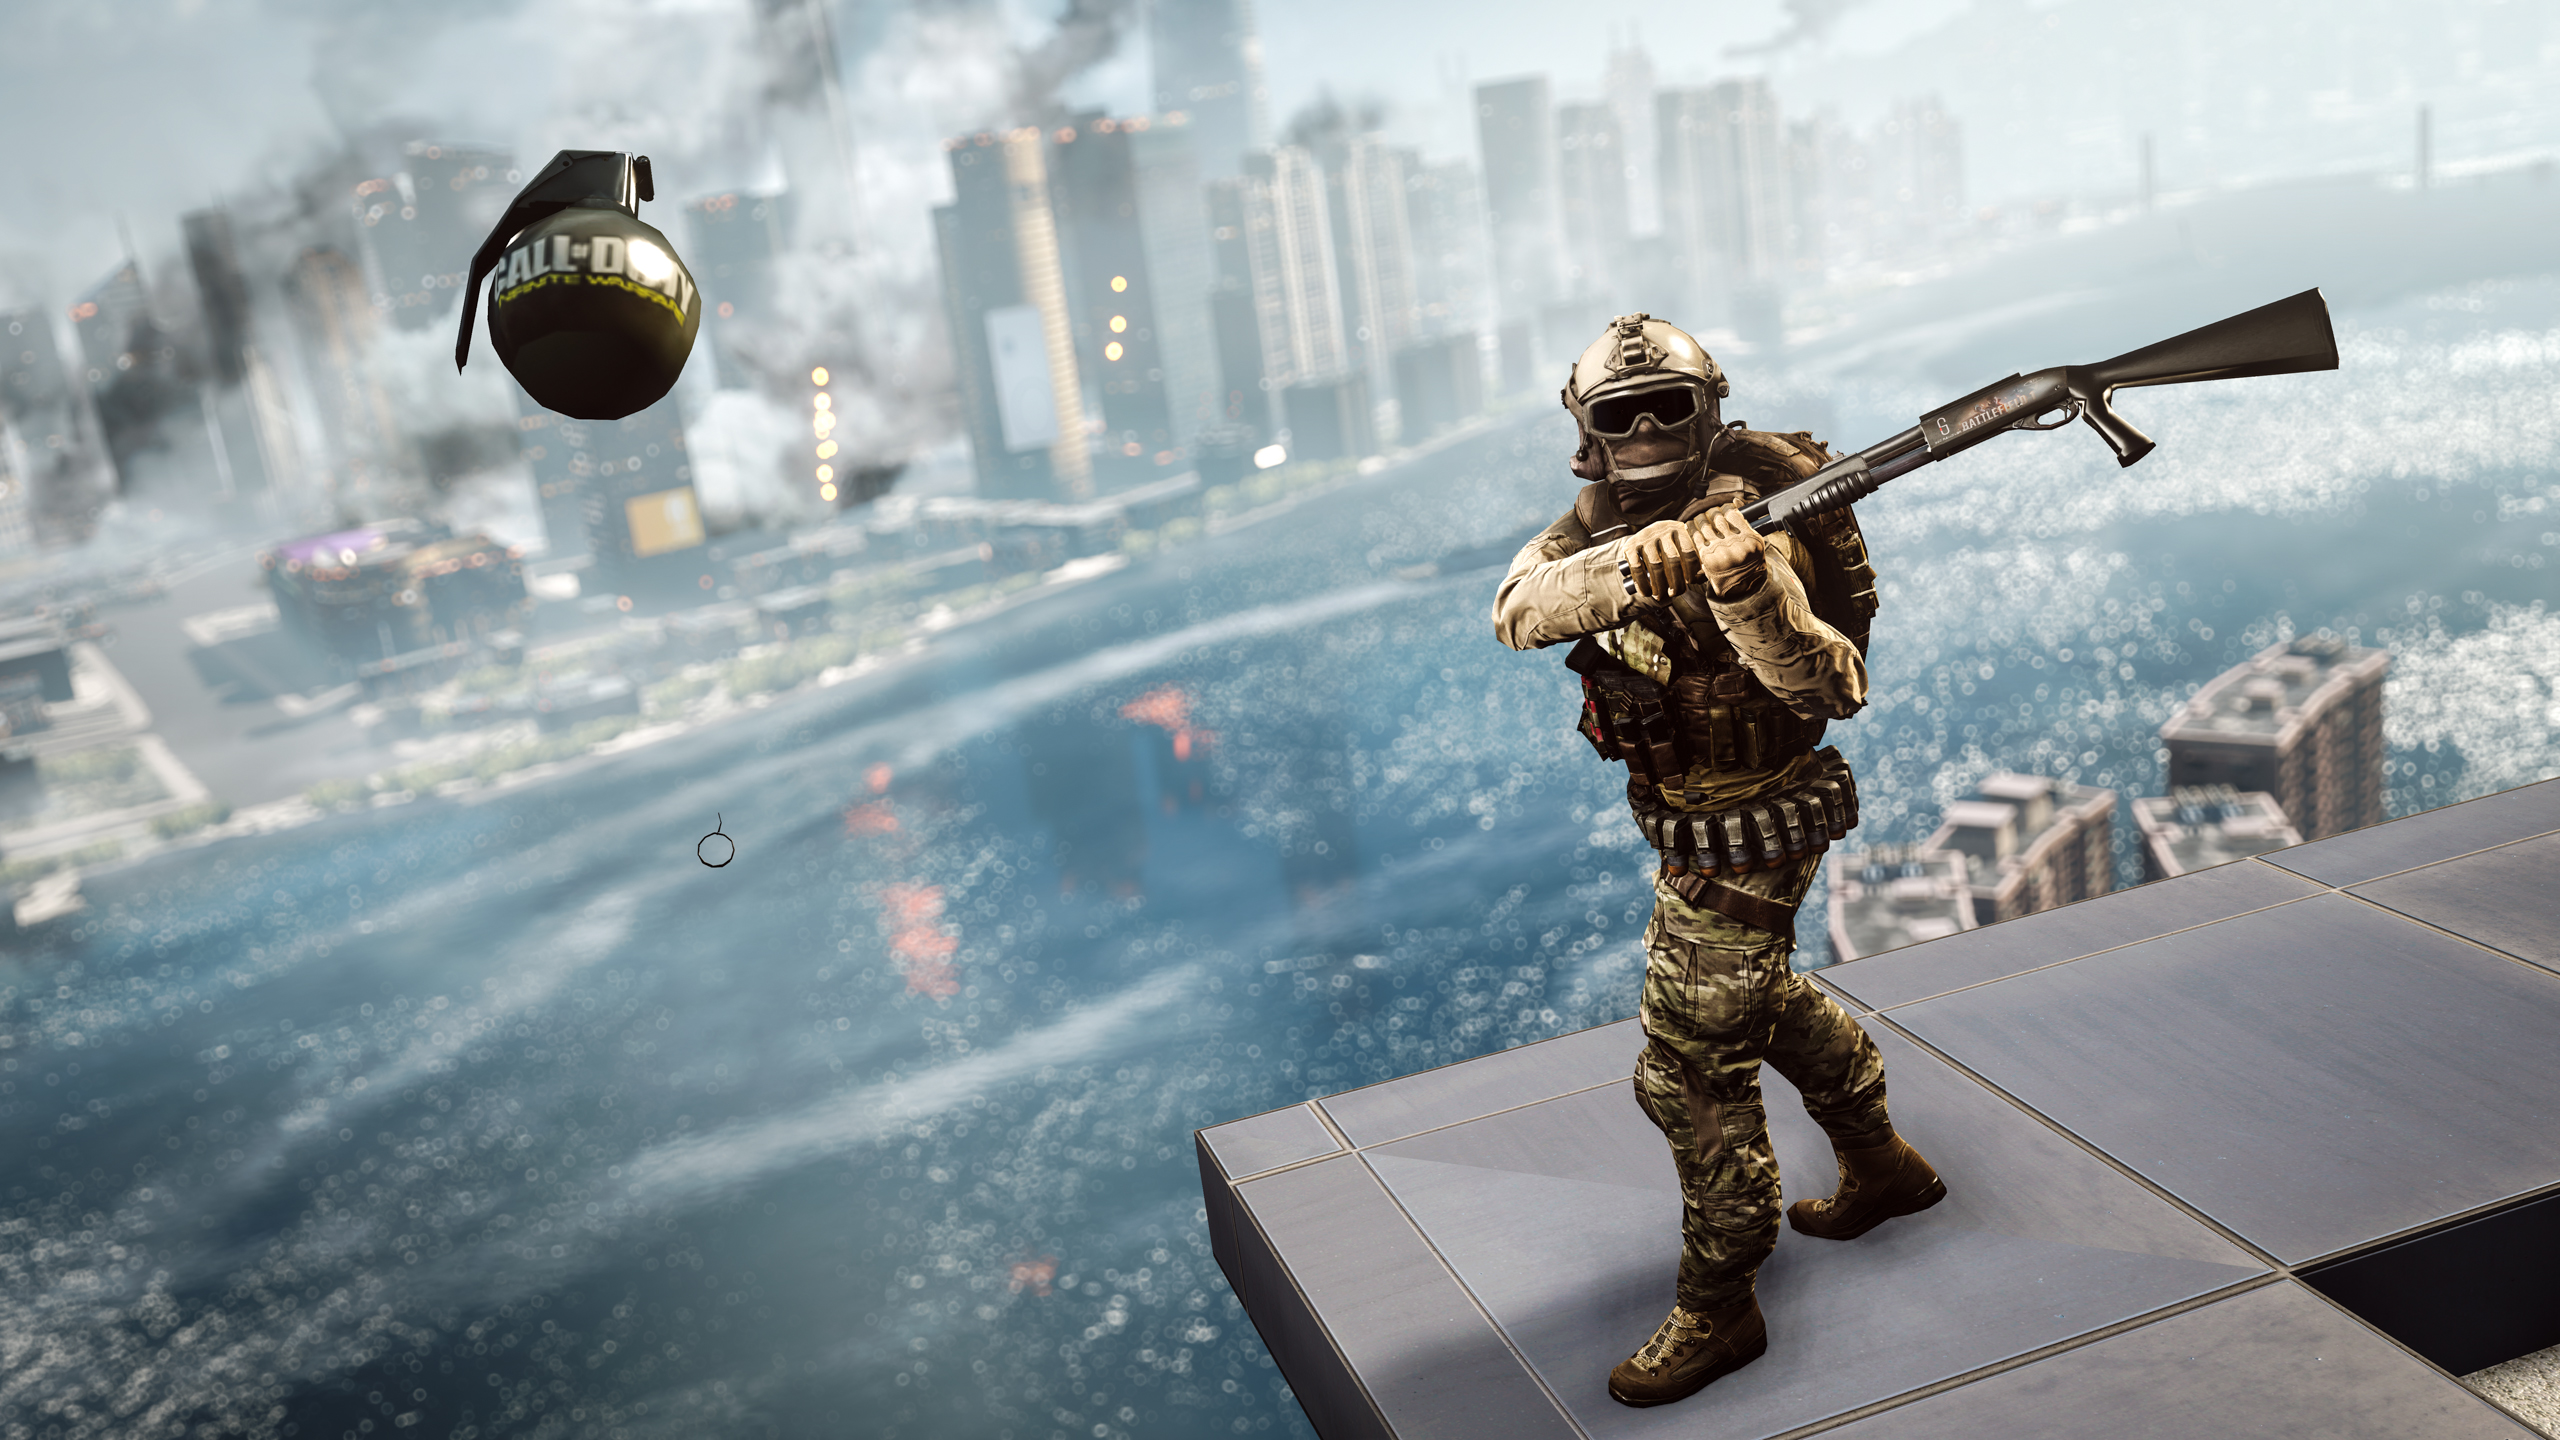 Beautiful gallery of BF4 screenshots from. 